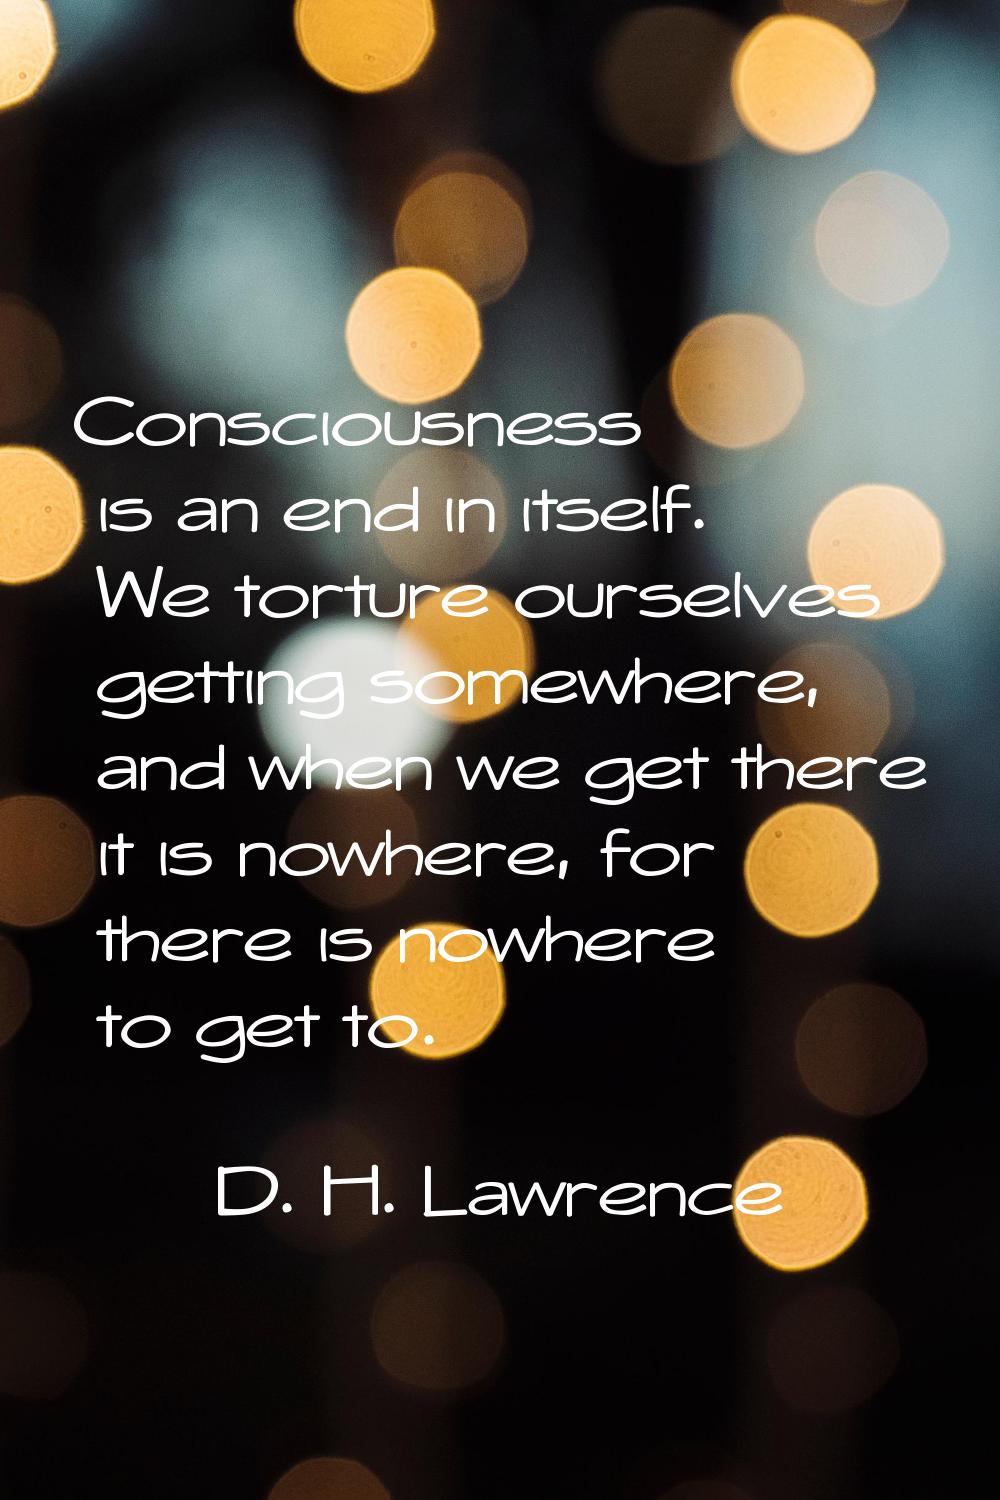 Consciousness is an end in itself. We torture ourselves getting somewhere, and when we get there it